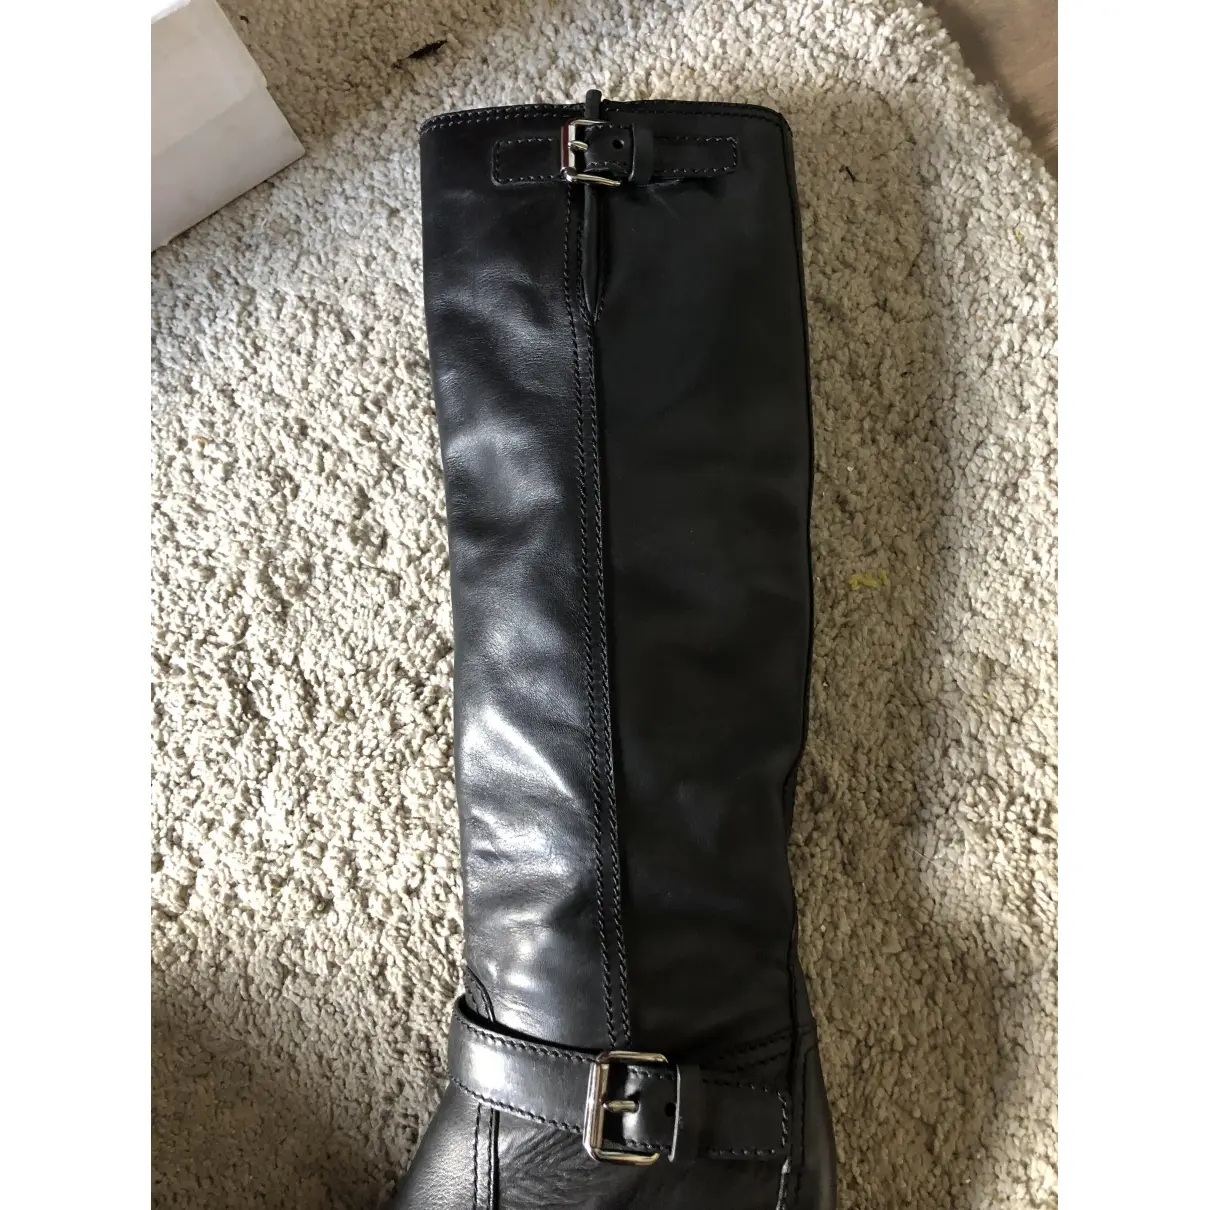 Leather biker boots Carshoe